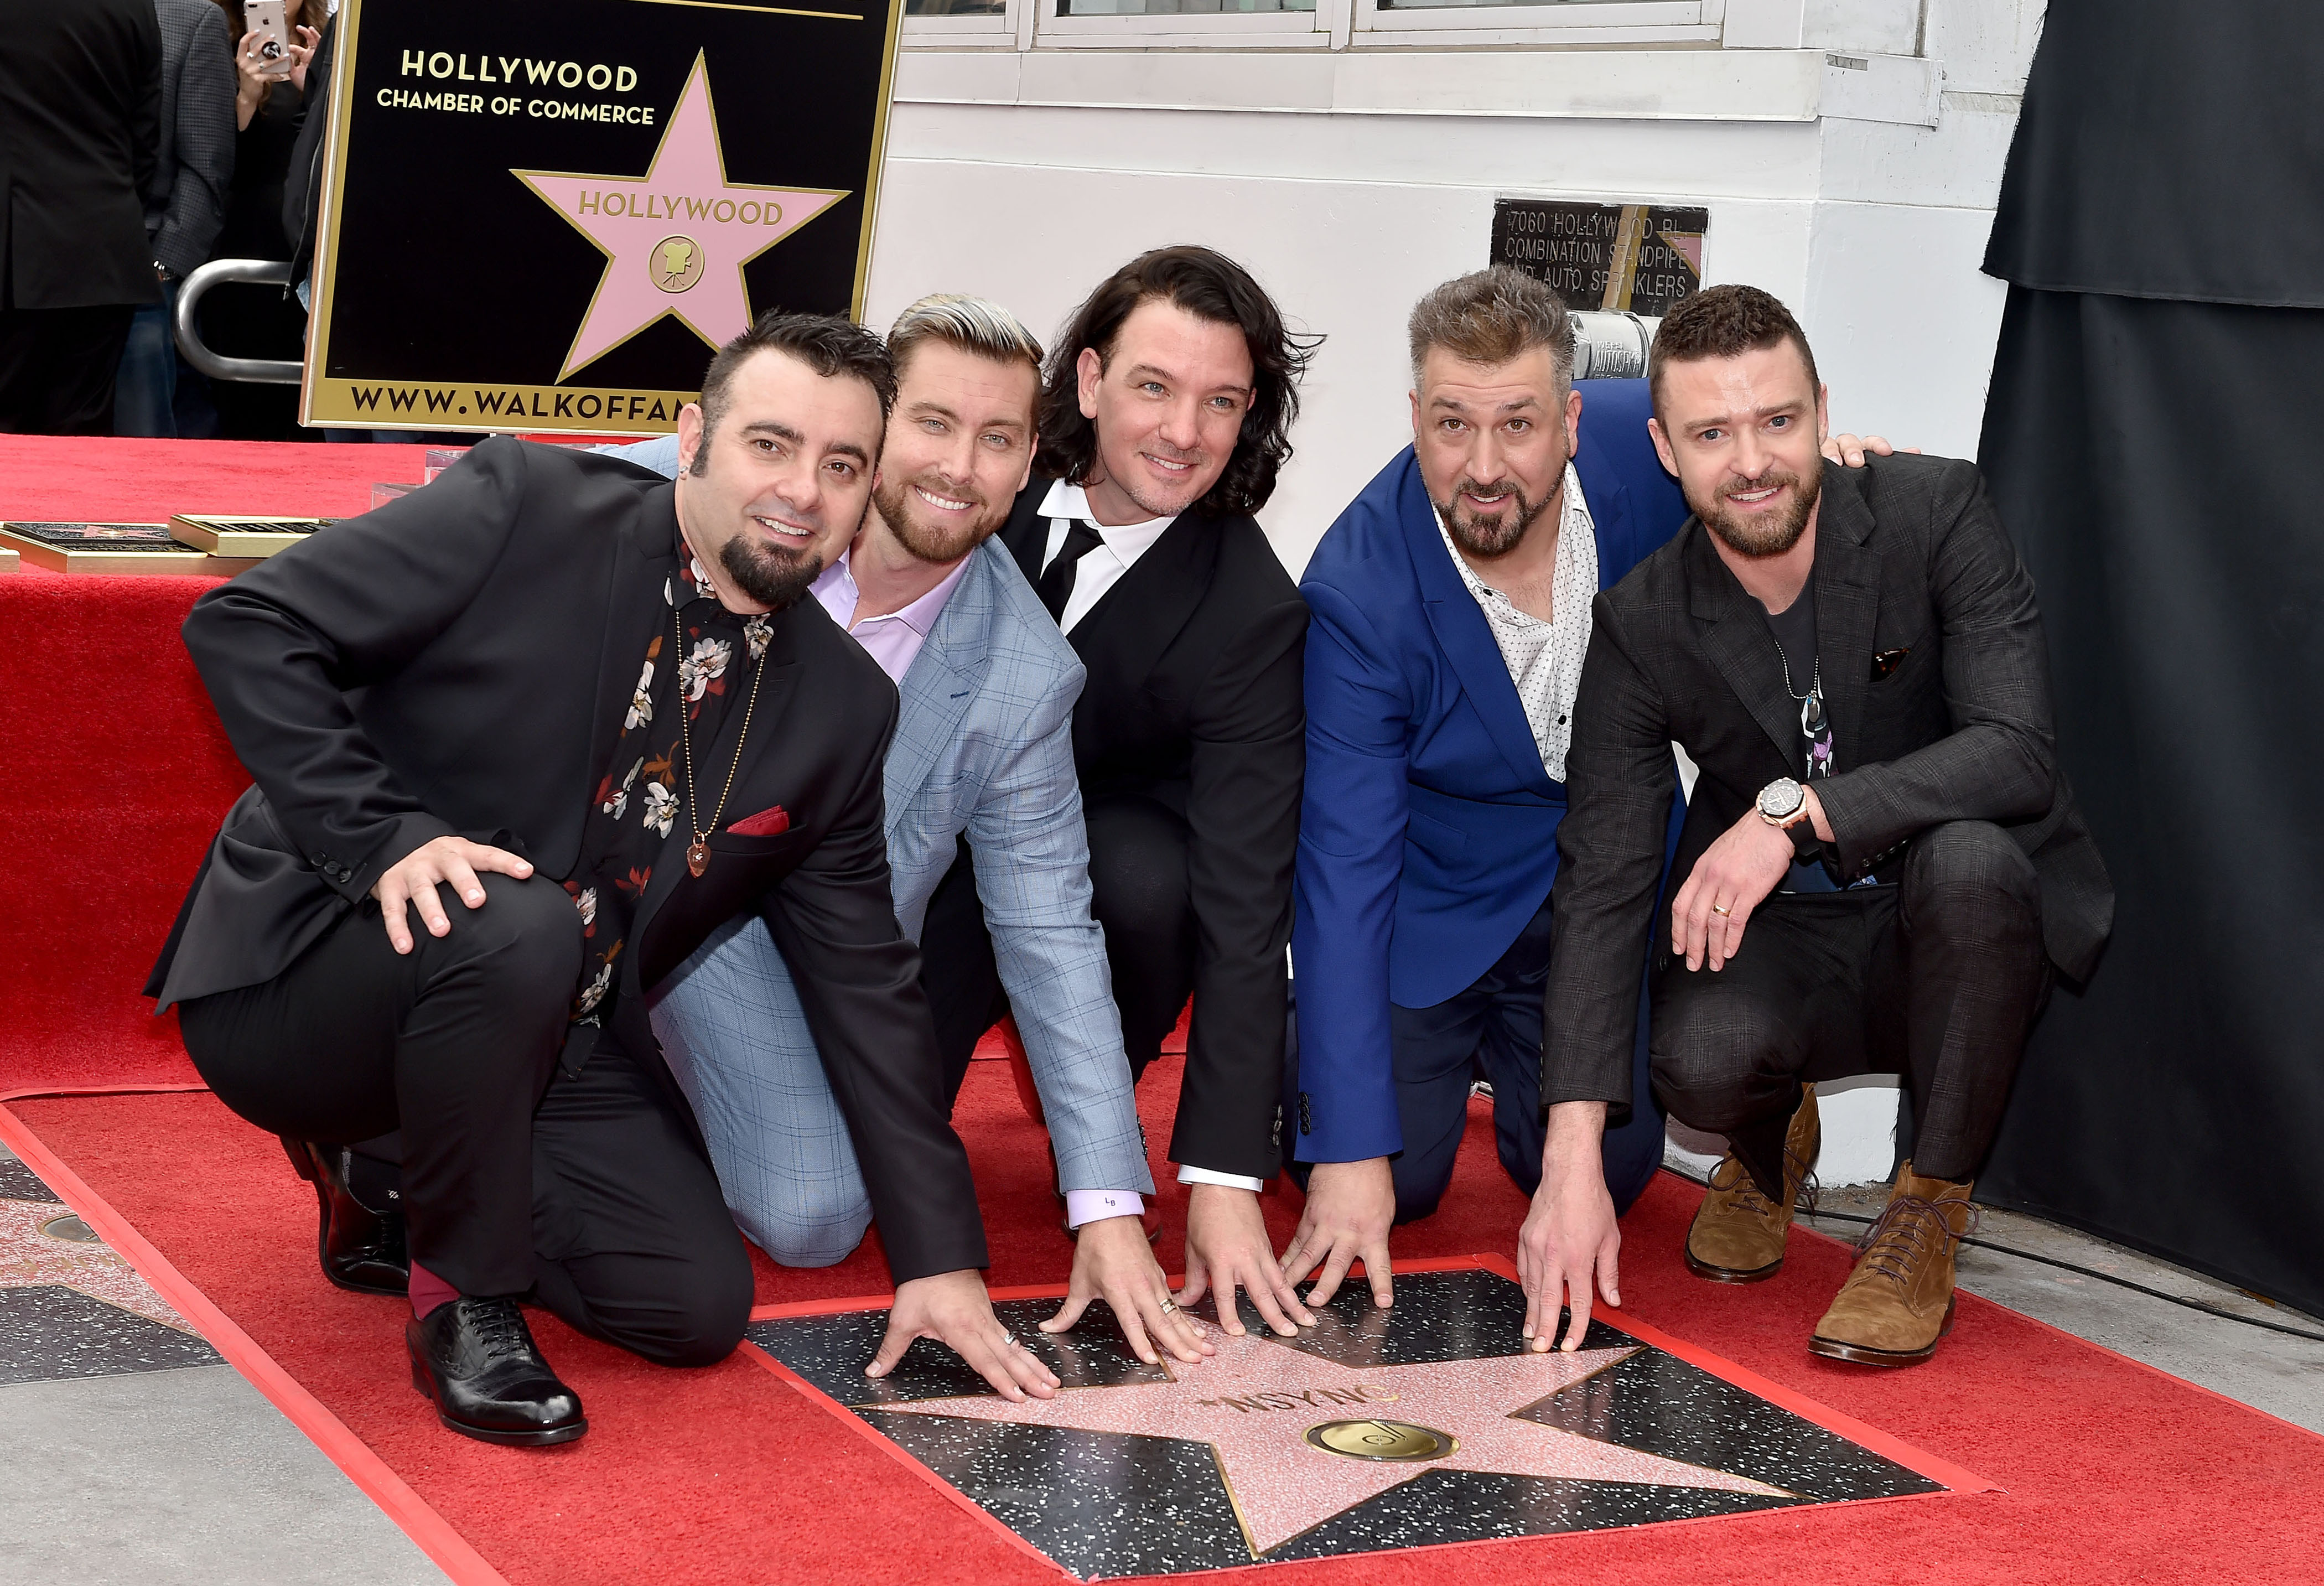 *NSYNC getting their star on the Hollywood Walk of Fame in April 2018